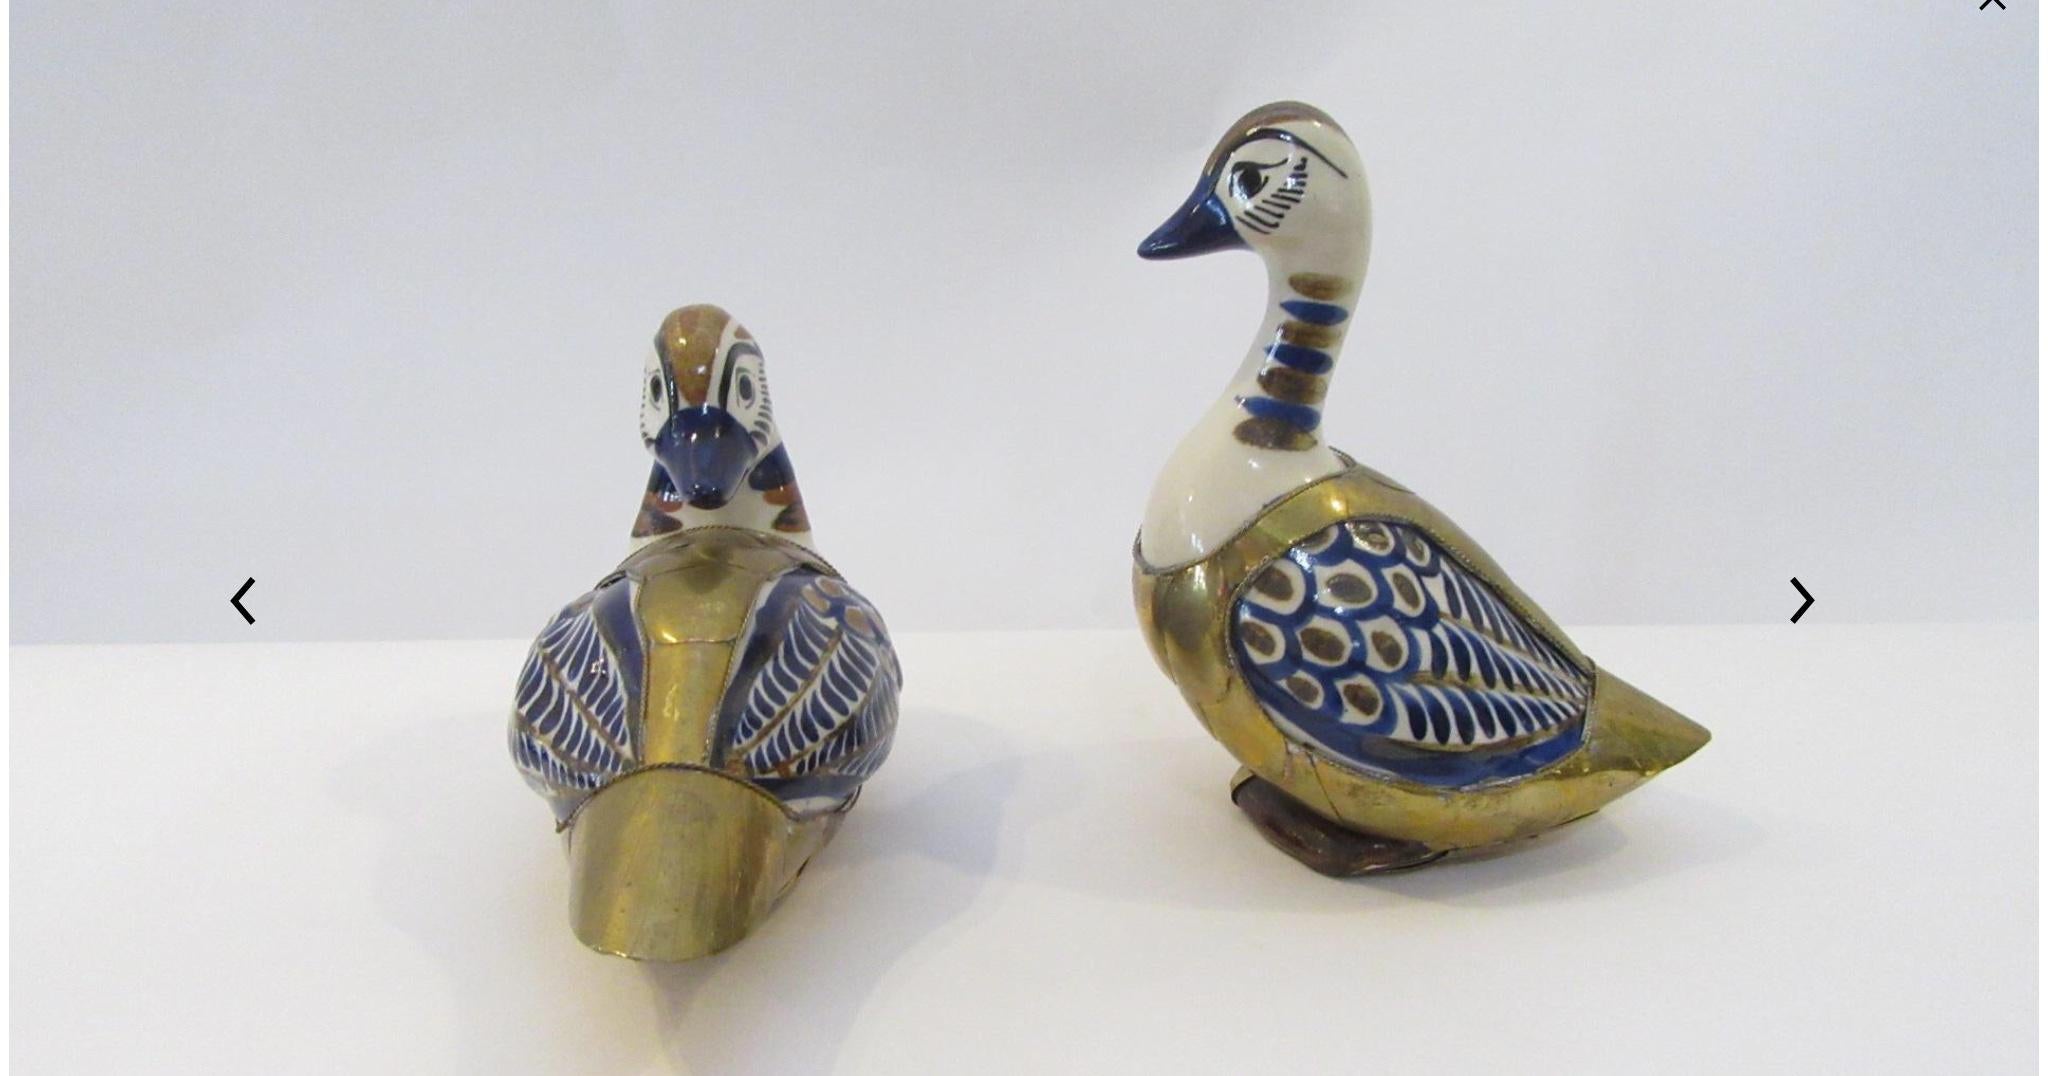 Excellent accent pieces by renowned Mexican Artist Sergio Bustamante.
Short duck dimensions: 8.5” L x 4.5” W x 5.5” H
Tall duck dimensions: 6.5” L x 4” W x 7.75” H.